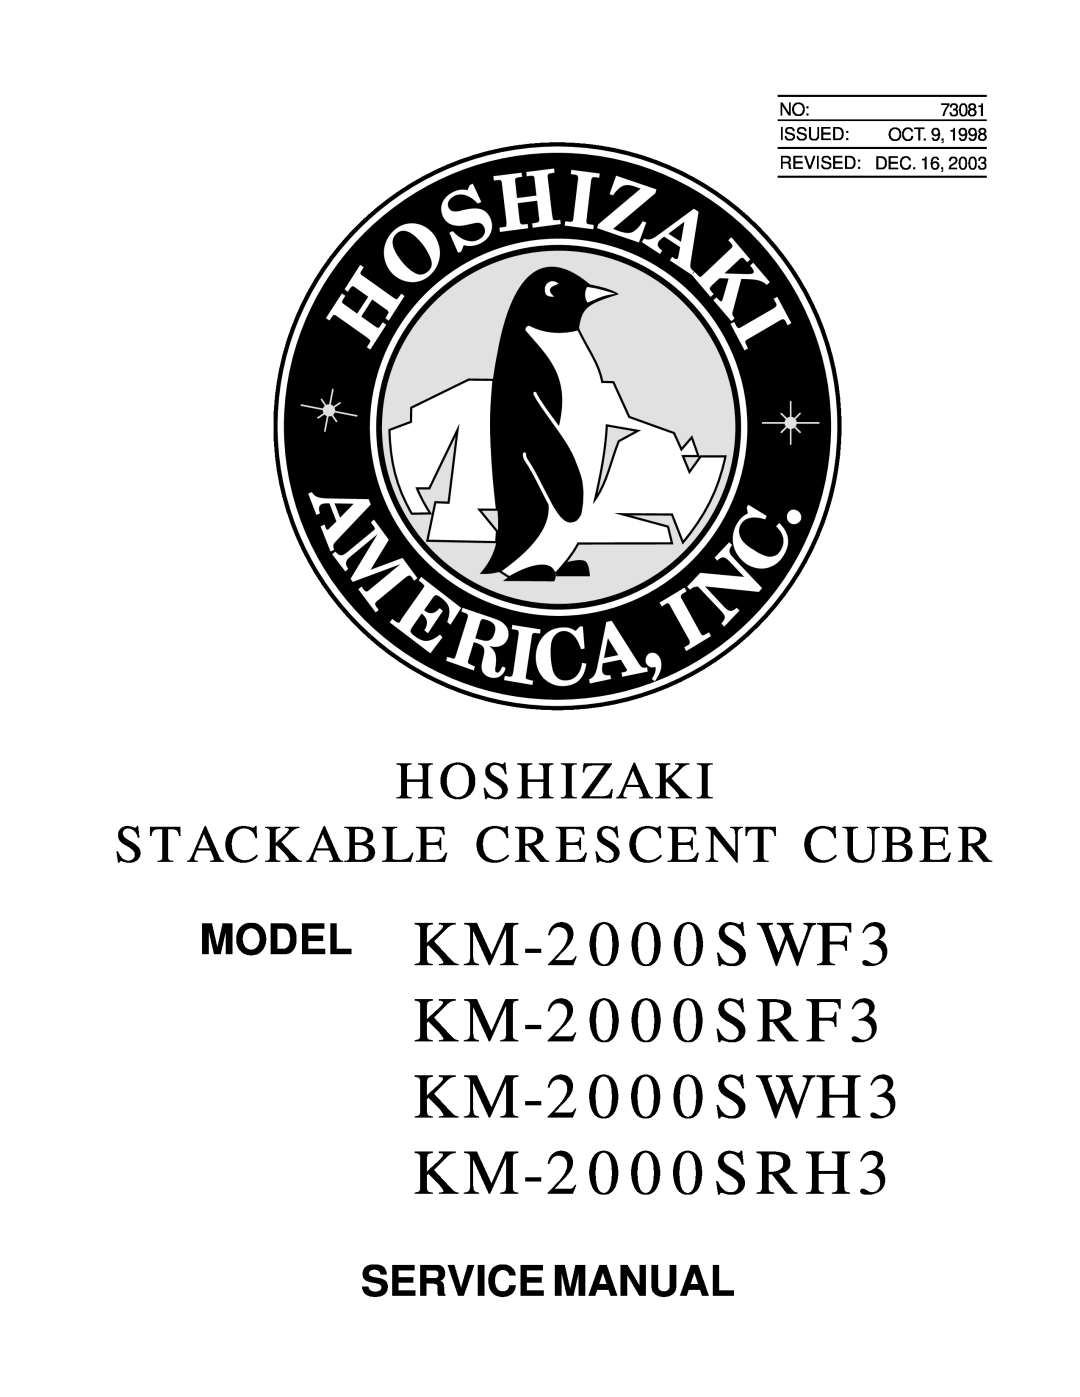 Hoshizaki instruction manual STACKABLE CRESCENT CUBER KM-2000SWH3 KM-2000SRH3, Instruction Manual, Issued, Revised 